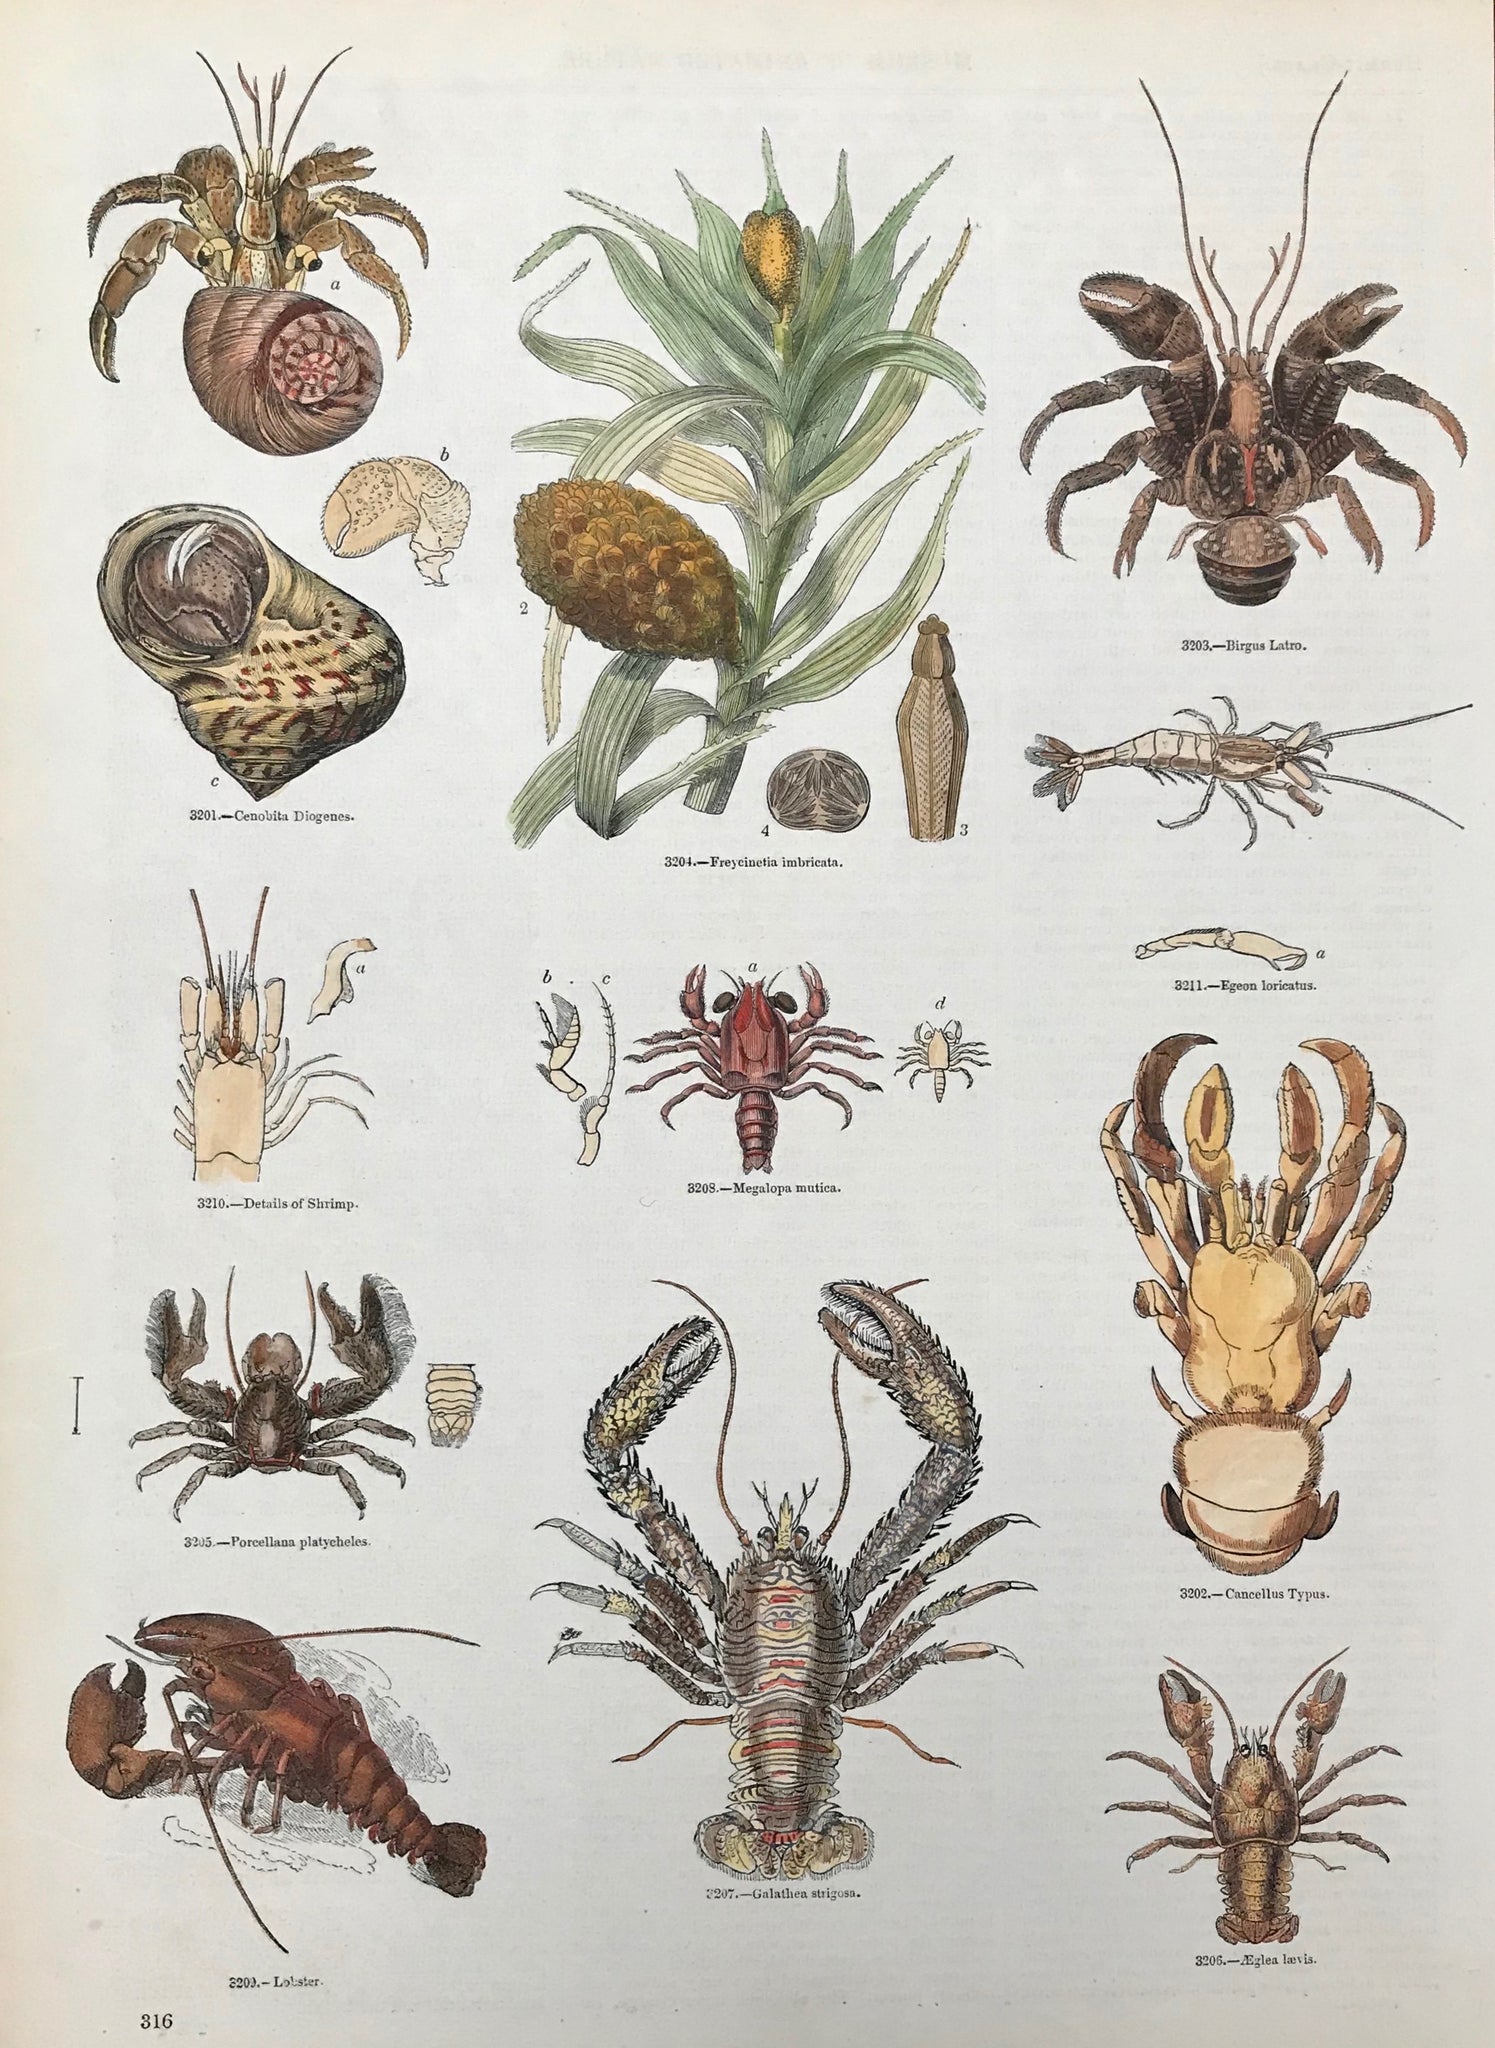 Cenobita Diogenes, Freycinetia imbricata, Birgus Latro, Details of a shrimp, Megalopa mutica, Egeon loricatus, Porcellana platycheles, Cancellus Typus, Lobster, Galathea Strigosa, Aeglea laevis  Wood engravings from an illustrated work ca 1875. Recent hand coloring. On the reverse side is text (in English) about these animals.